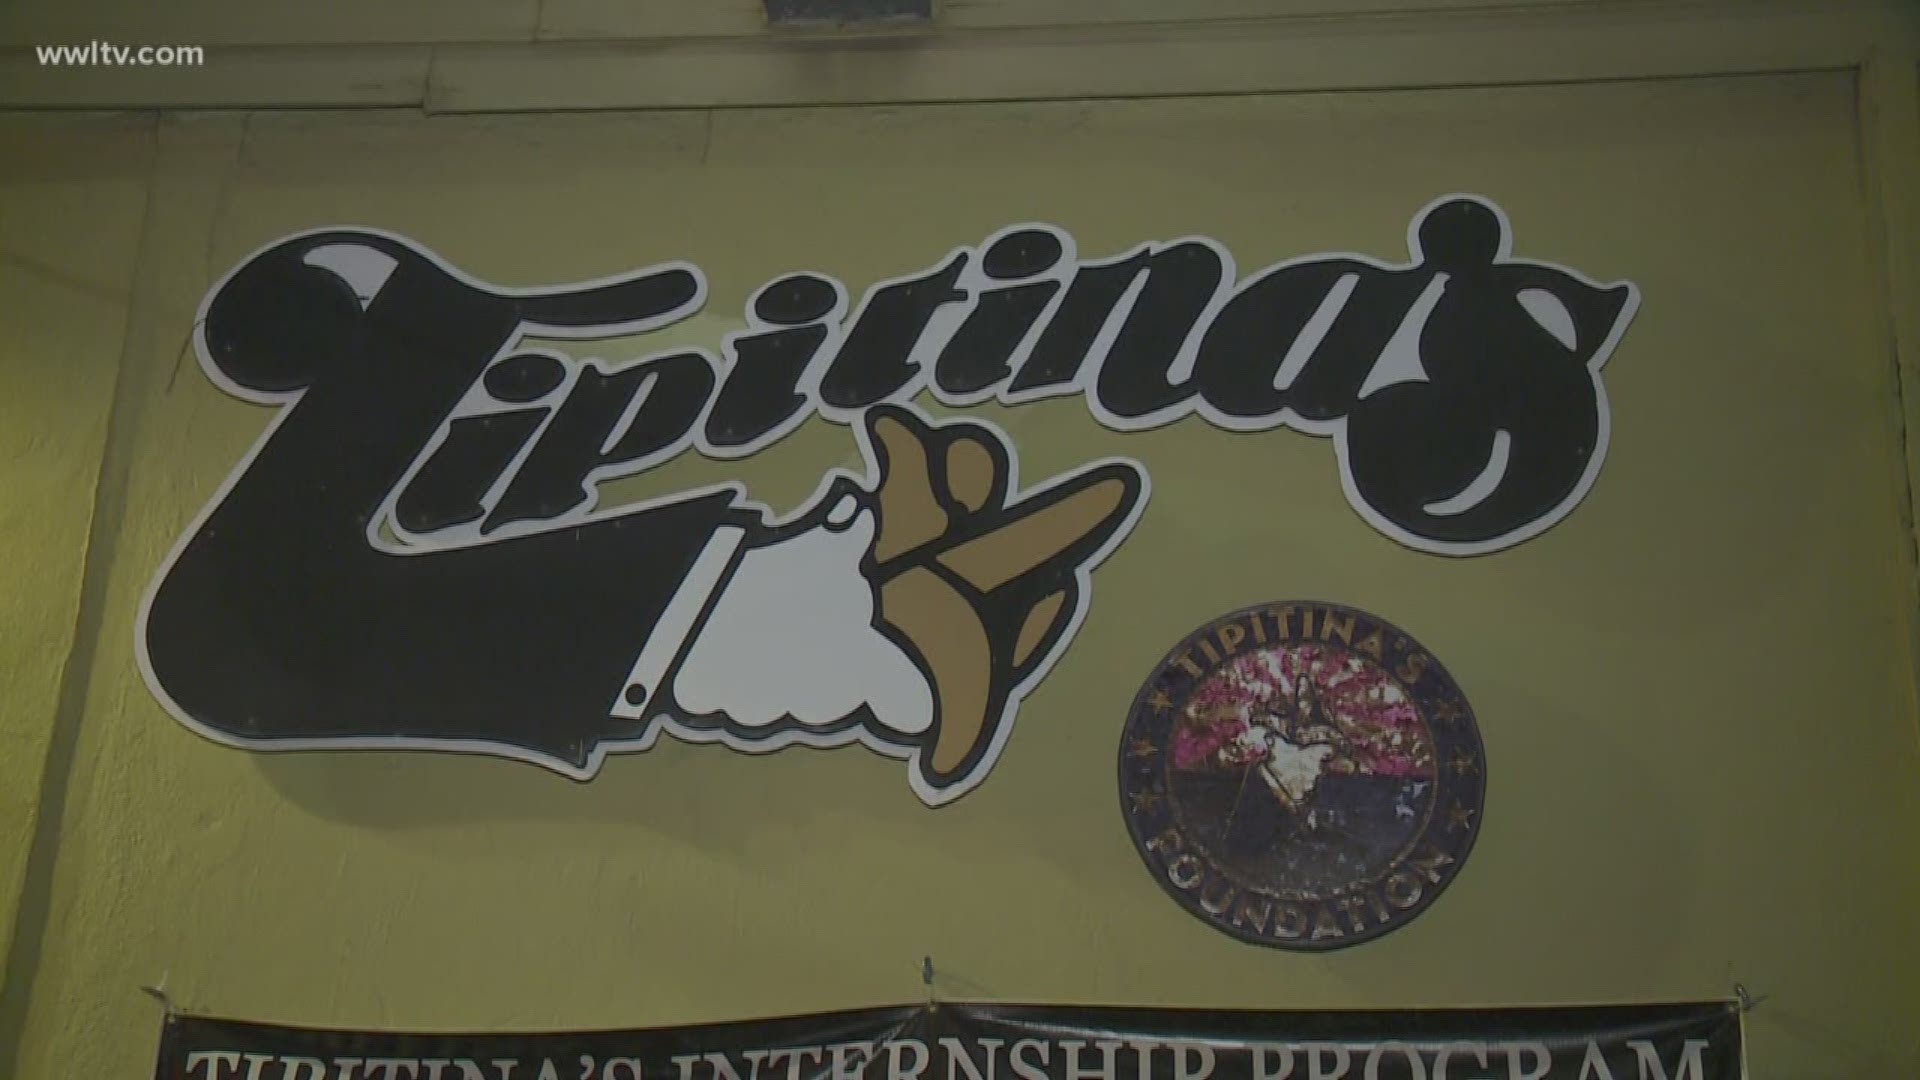 The New Orleans funk band Galactic is trying to piece together a deal to purchase the iconic music club Tipitina's from its beleaguered owner.